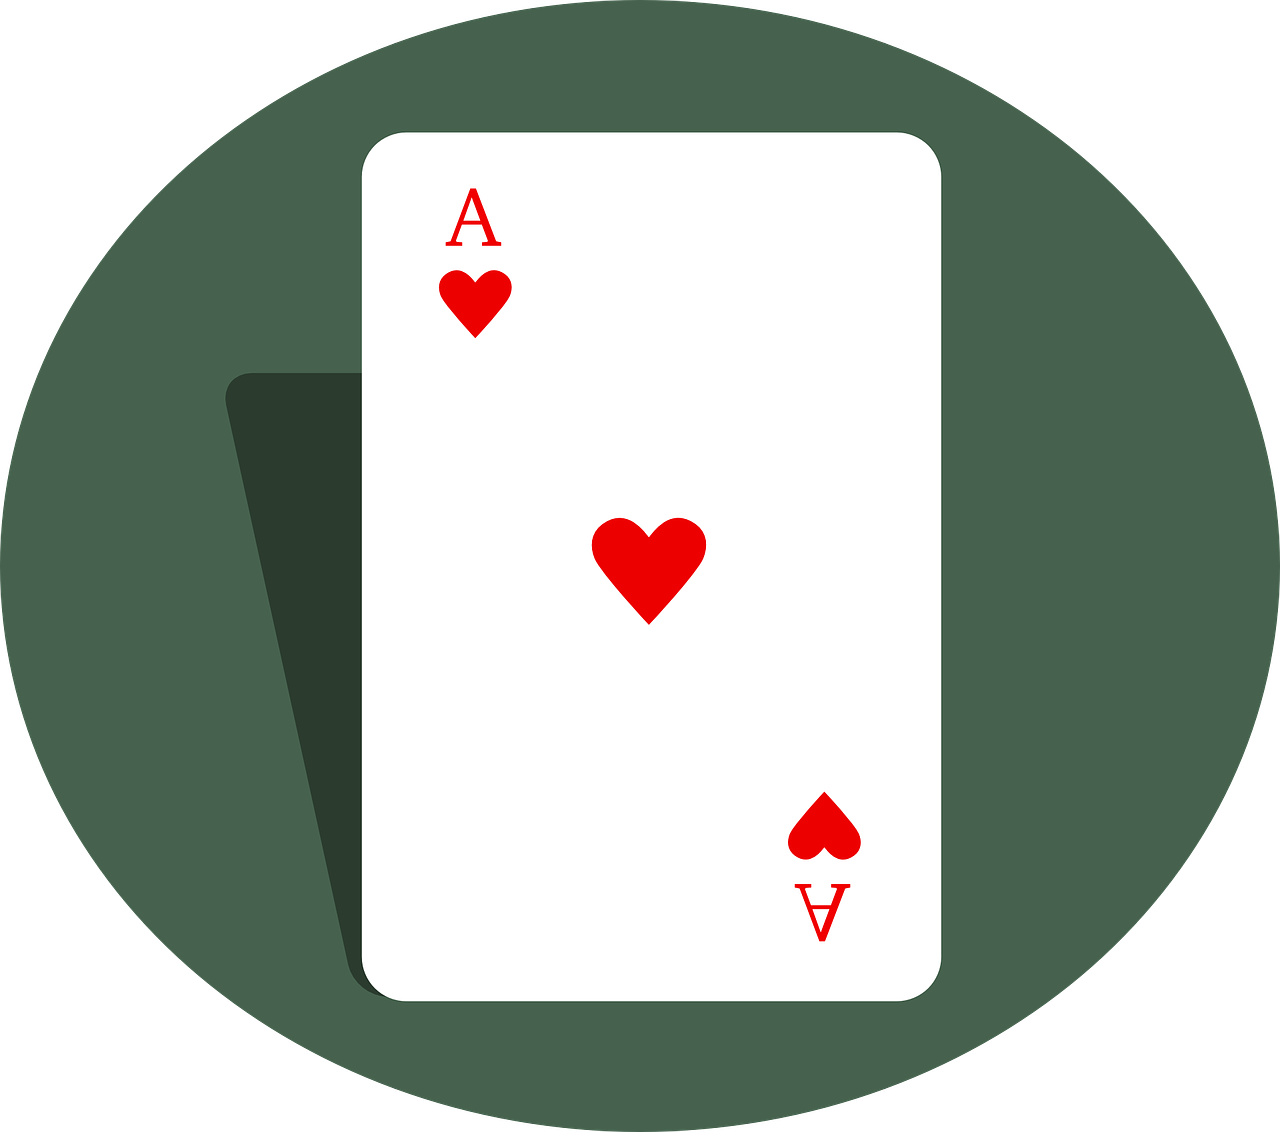 ace hearts game free photo